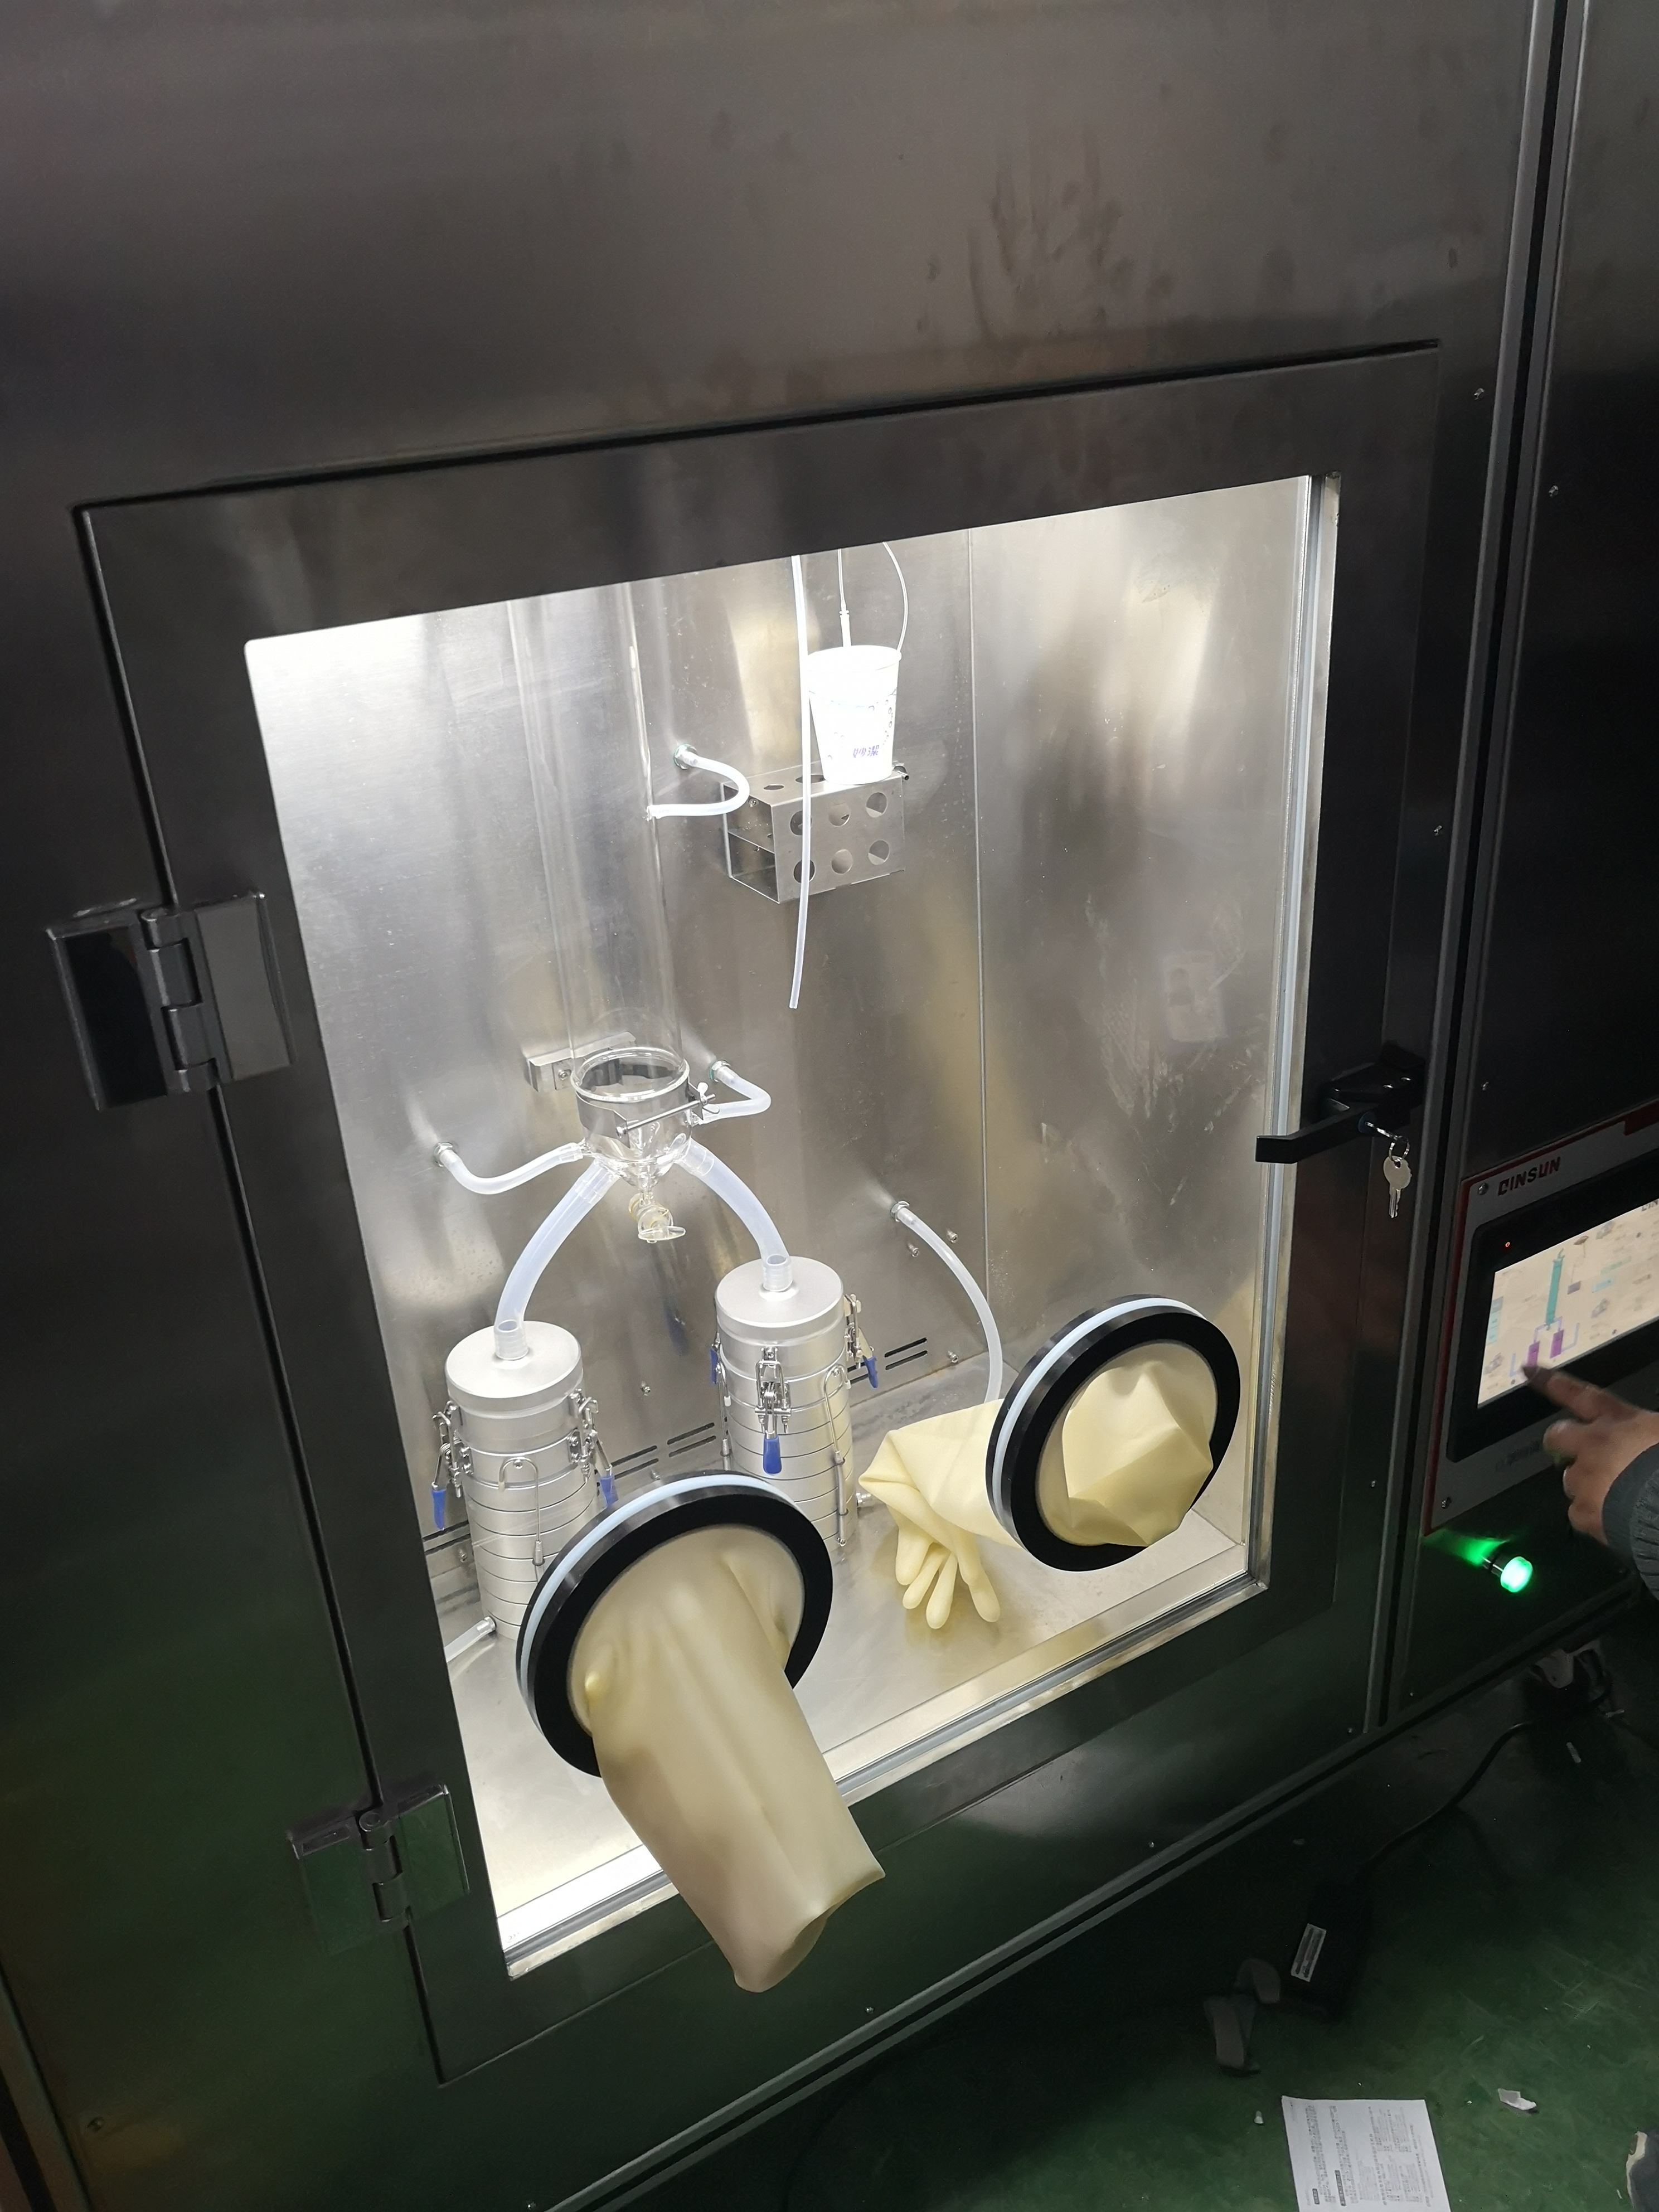 ASTM F2101 bacterial Filtration Efficiency (BFE)Tester